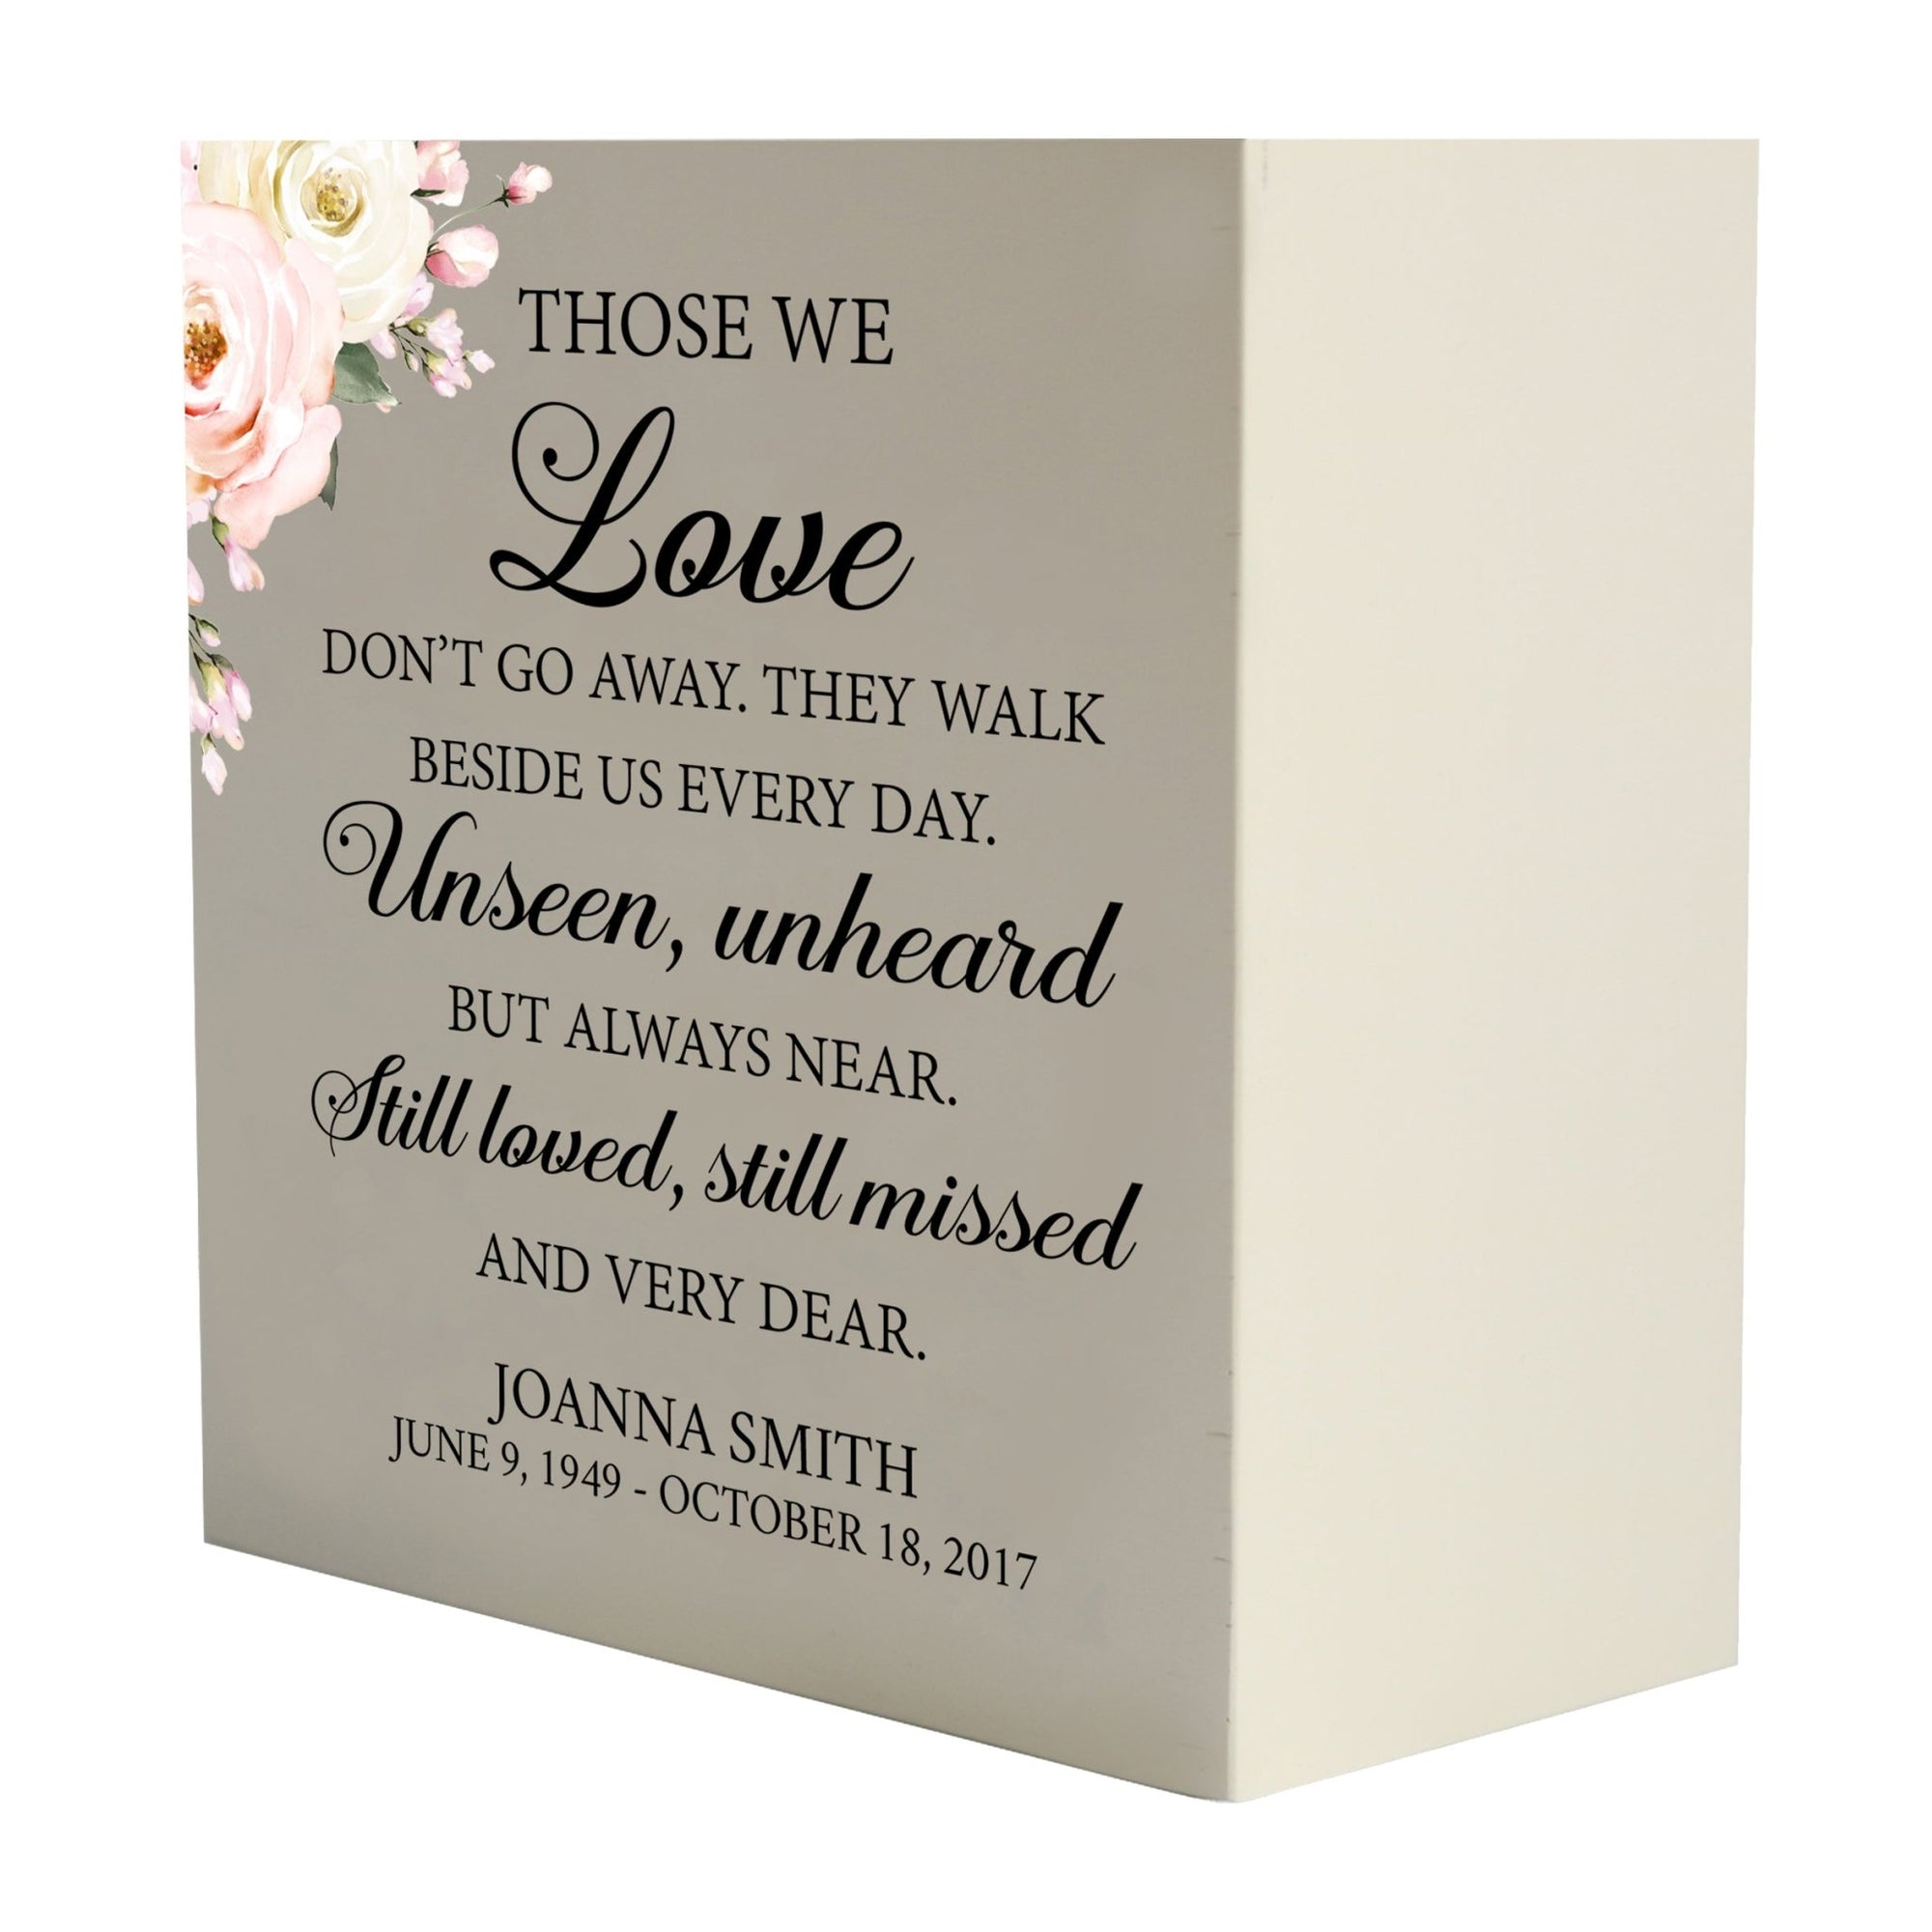 Personalized Modern Inspirational Memorial Wooden Shadow Box and Urn 6x6 holds 53 cu in of Human Ashes - Those We Love Don’t Go (Ivory) - LifeSong Milestones